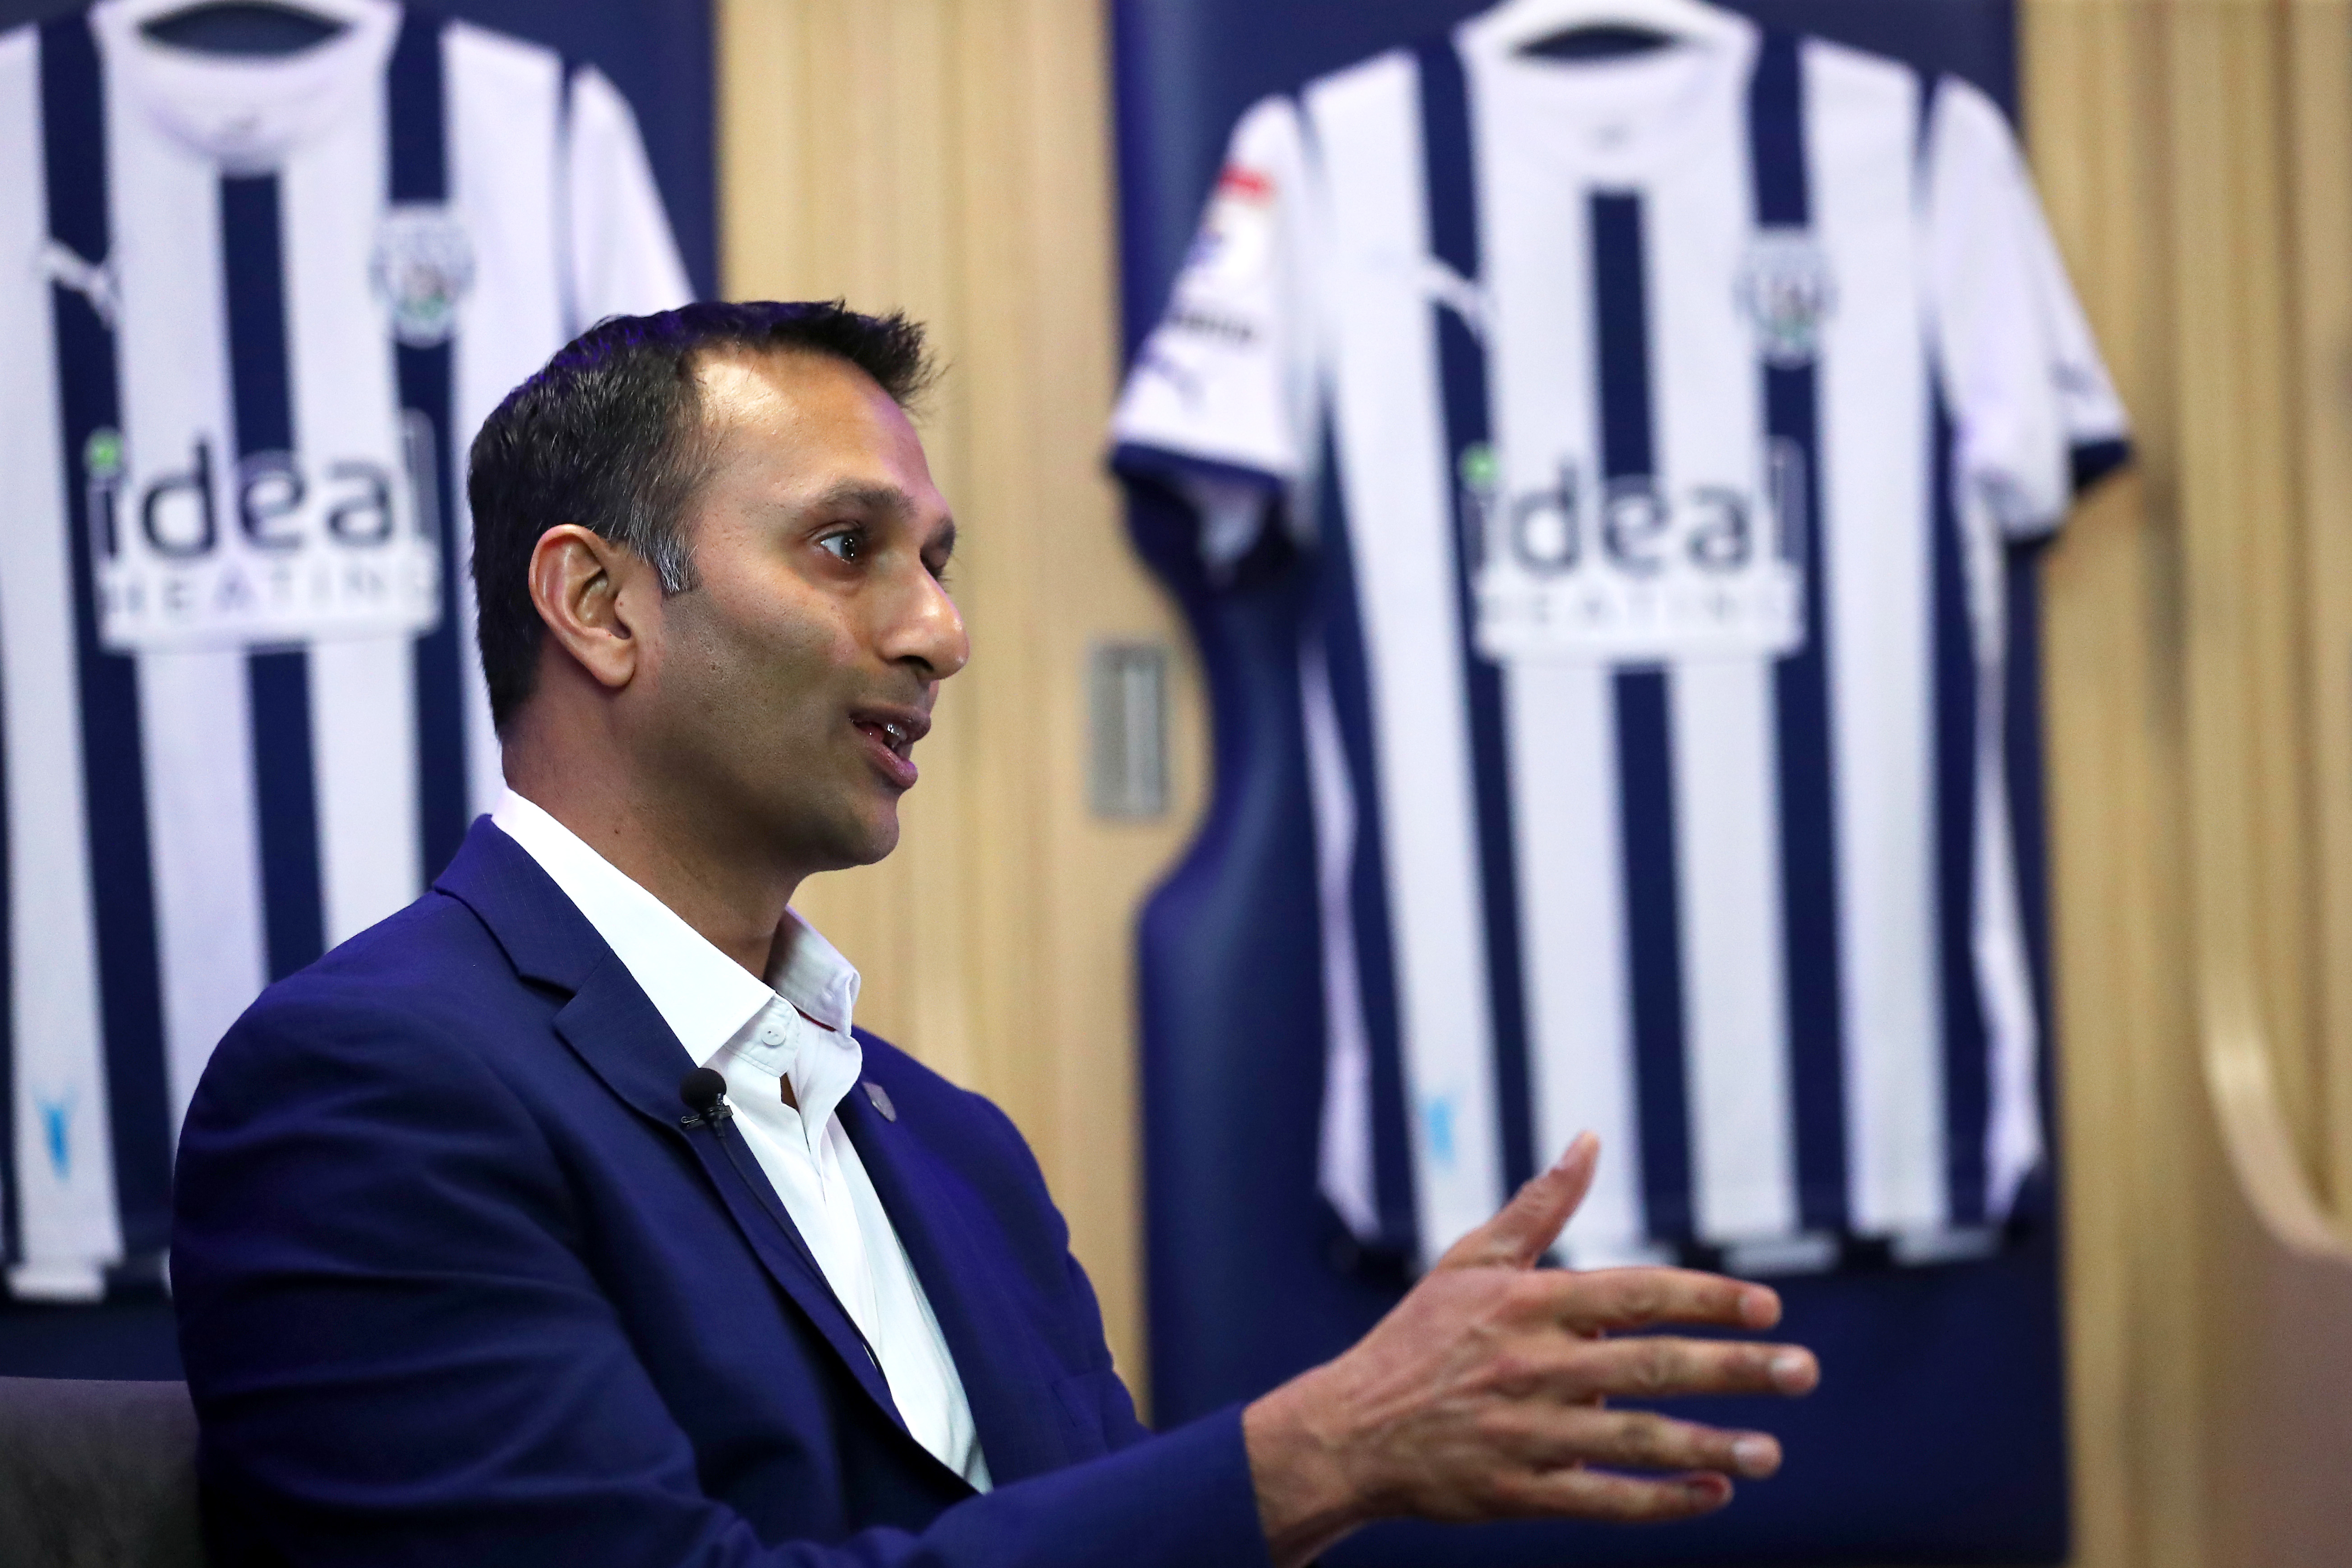 Shilen Patel is interviewed by WBA TV in the home dressing room with Albion shirts hanging behind him